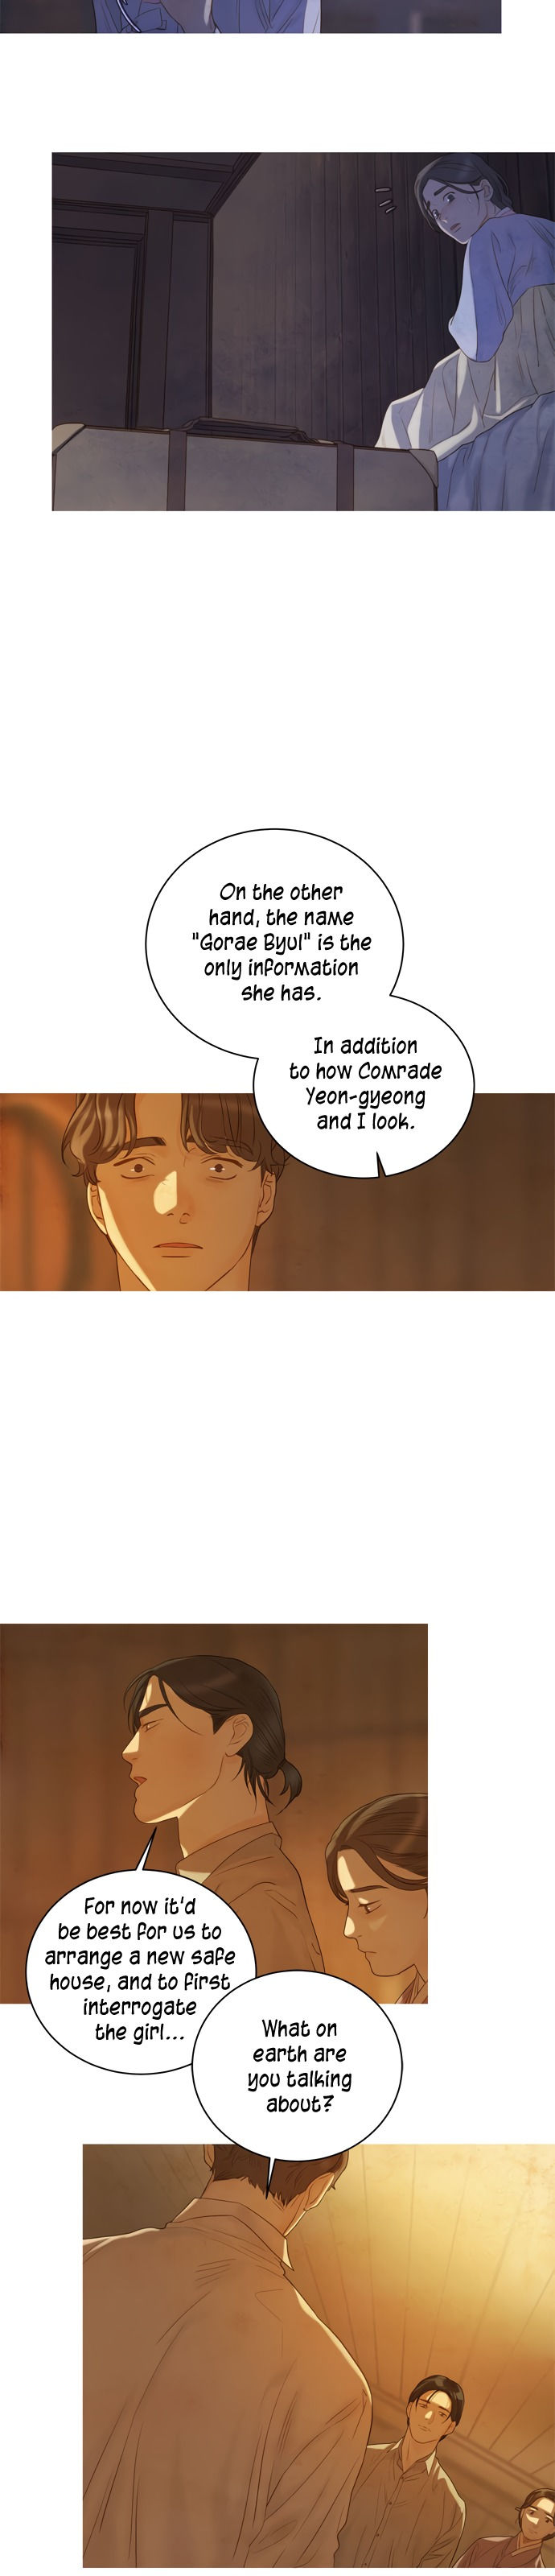 Gorae Byul - The Gyeongseong Mermaid - Chapter 18 Page 17